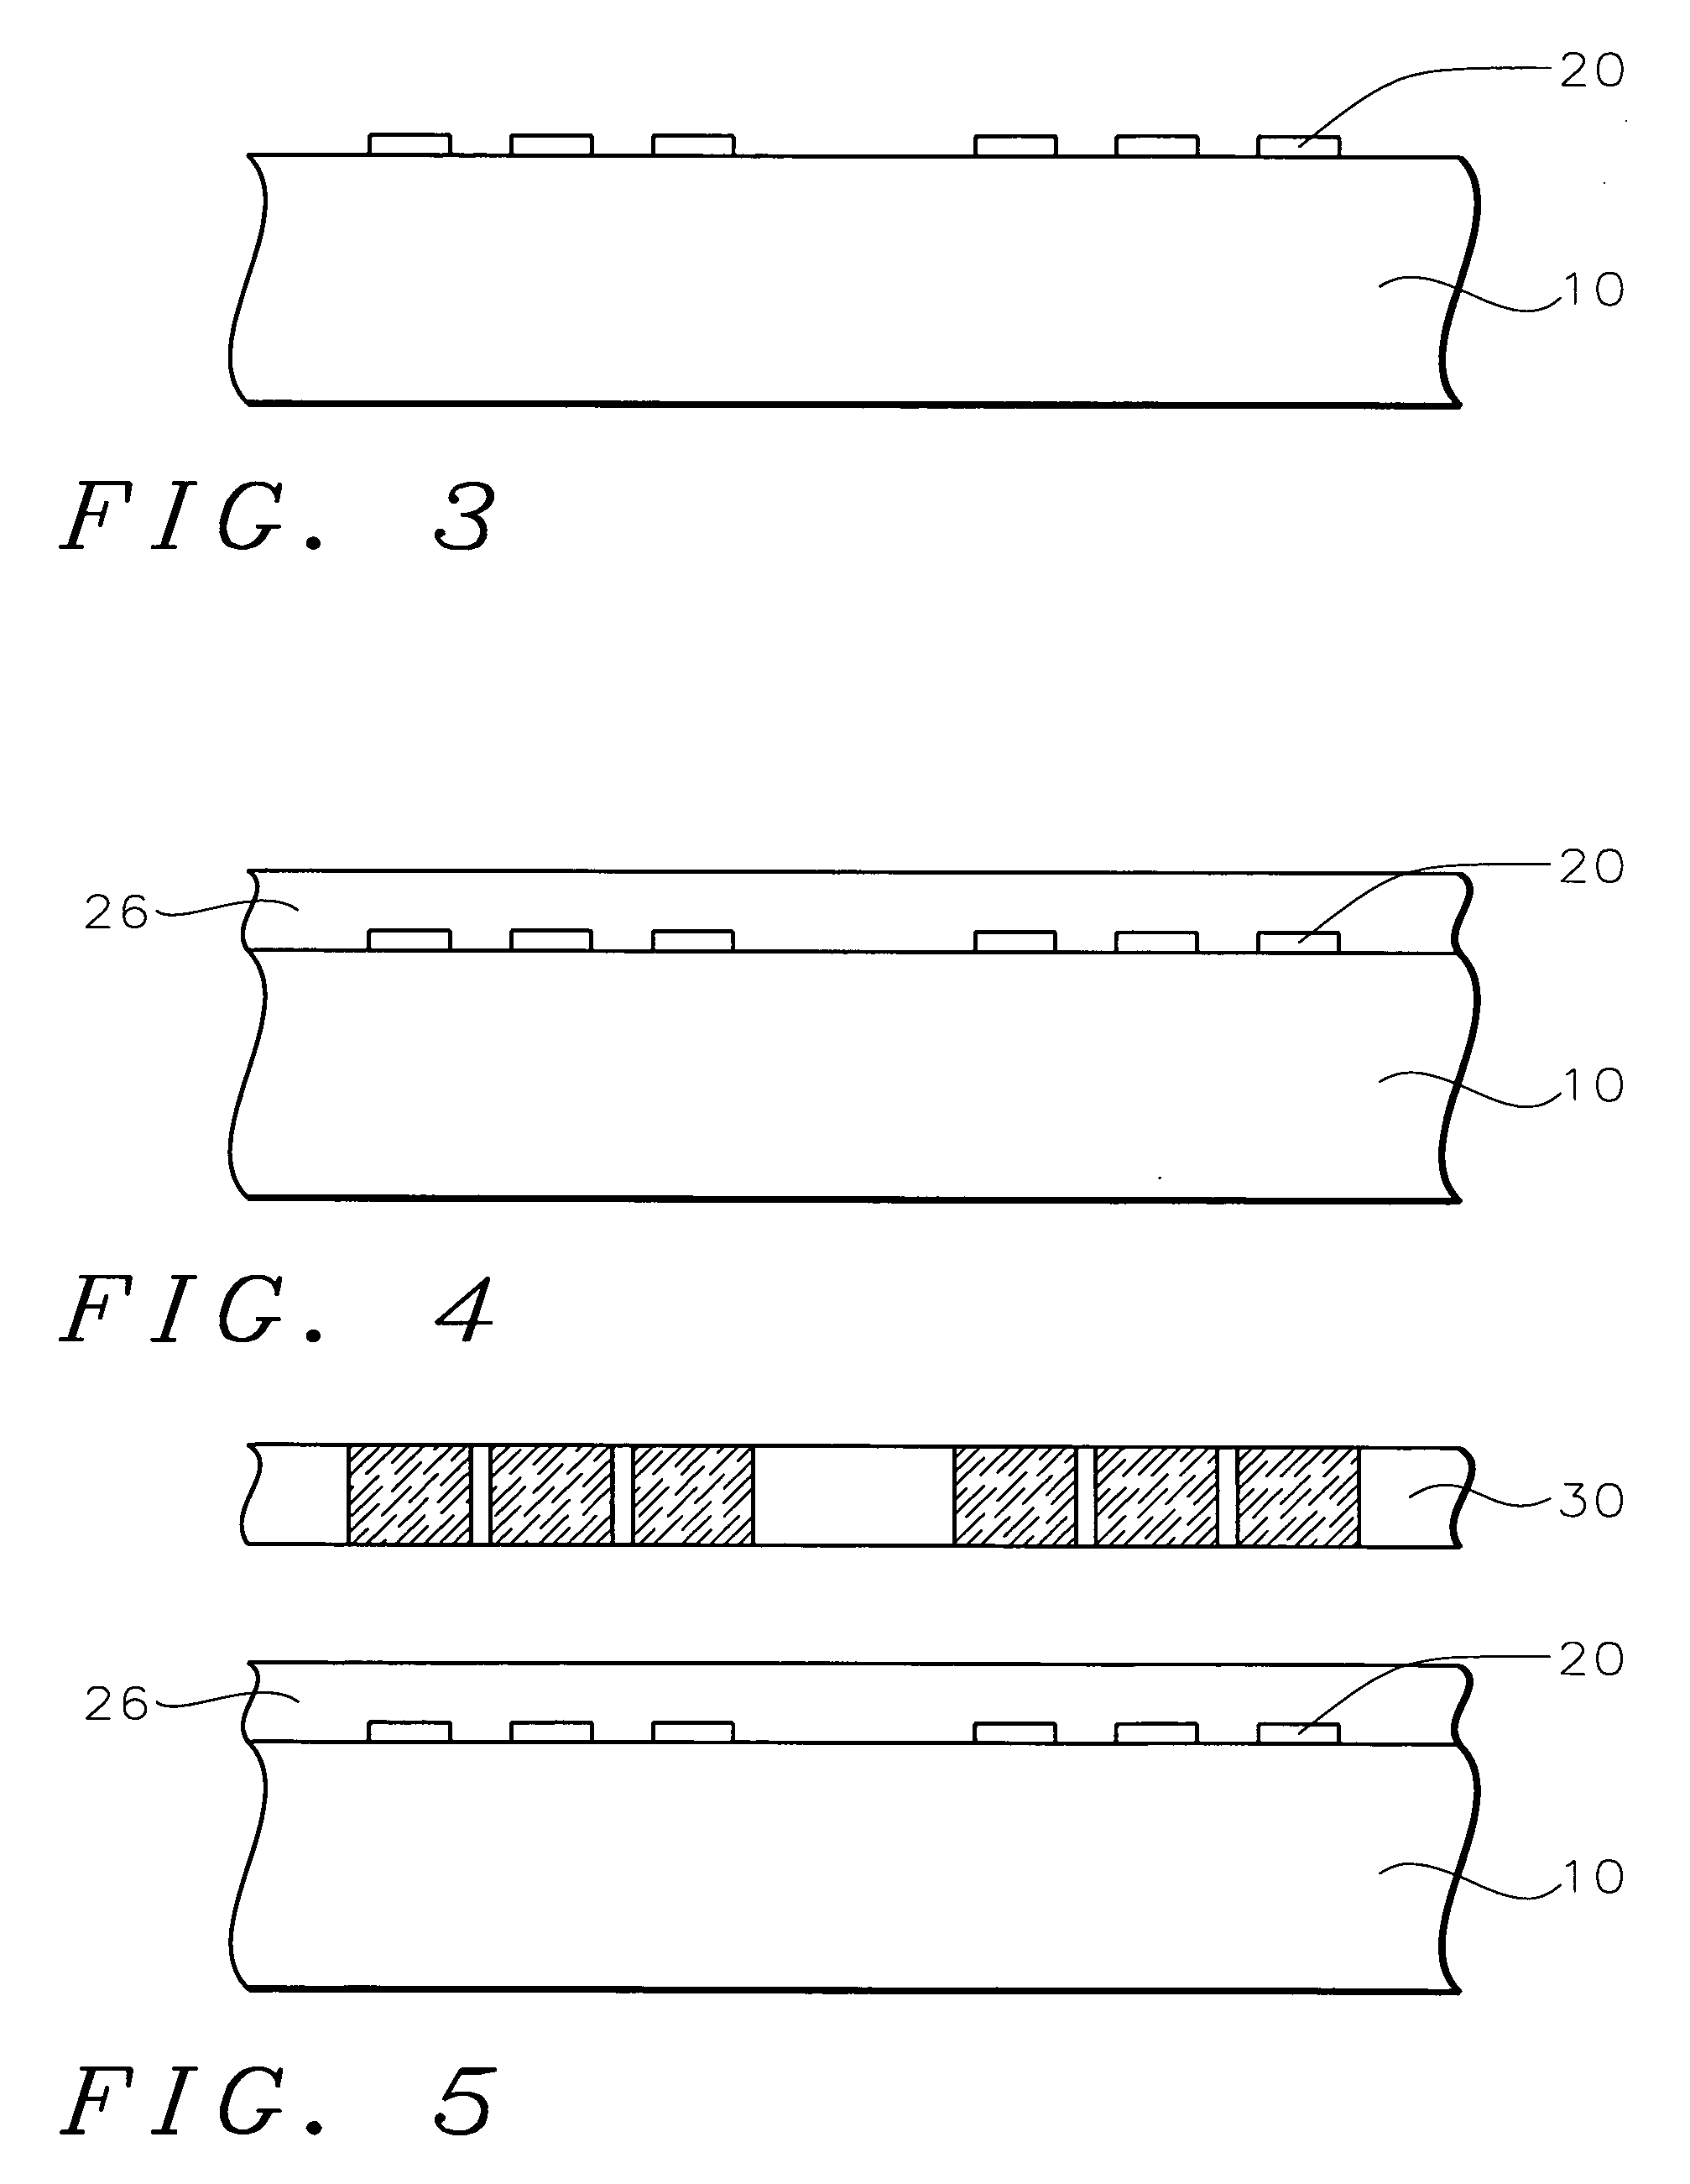 Method for ultra thinning bumped wafers for flip chip